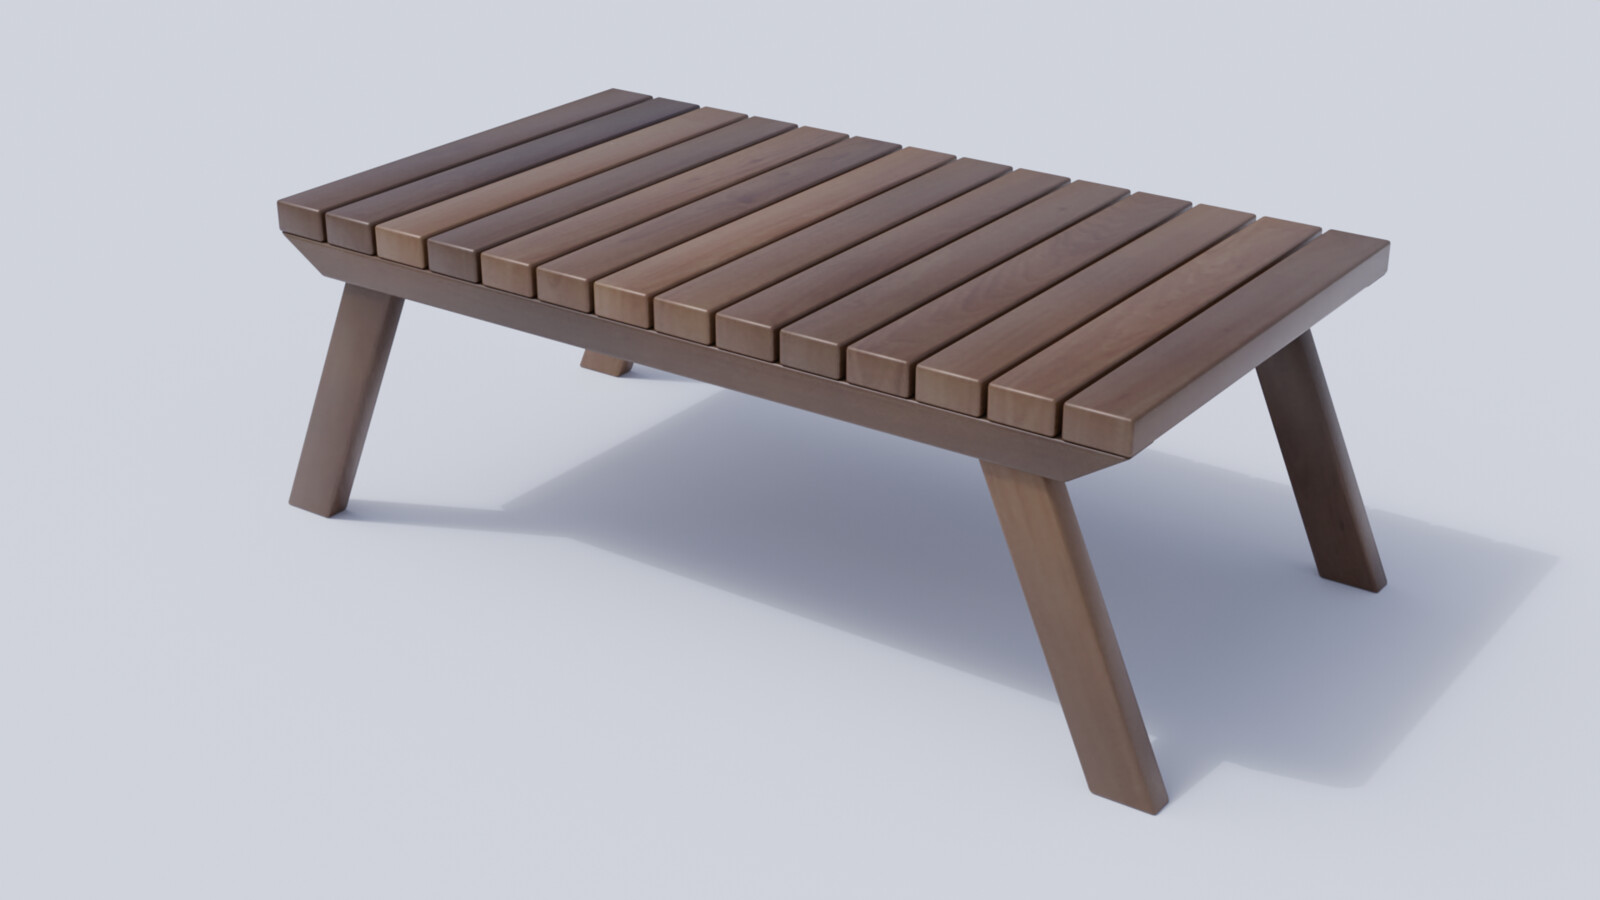 Outdoor Patio Dining Table render